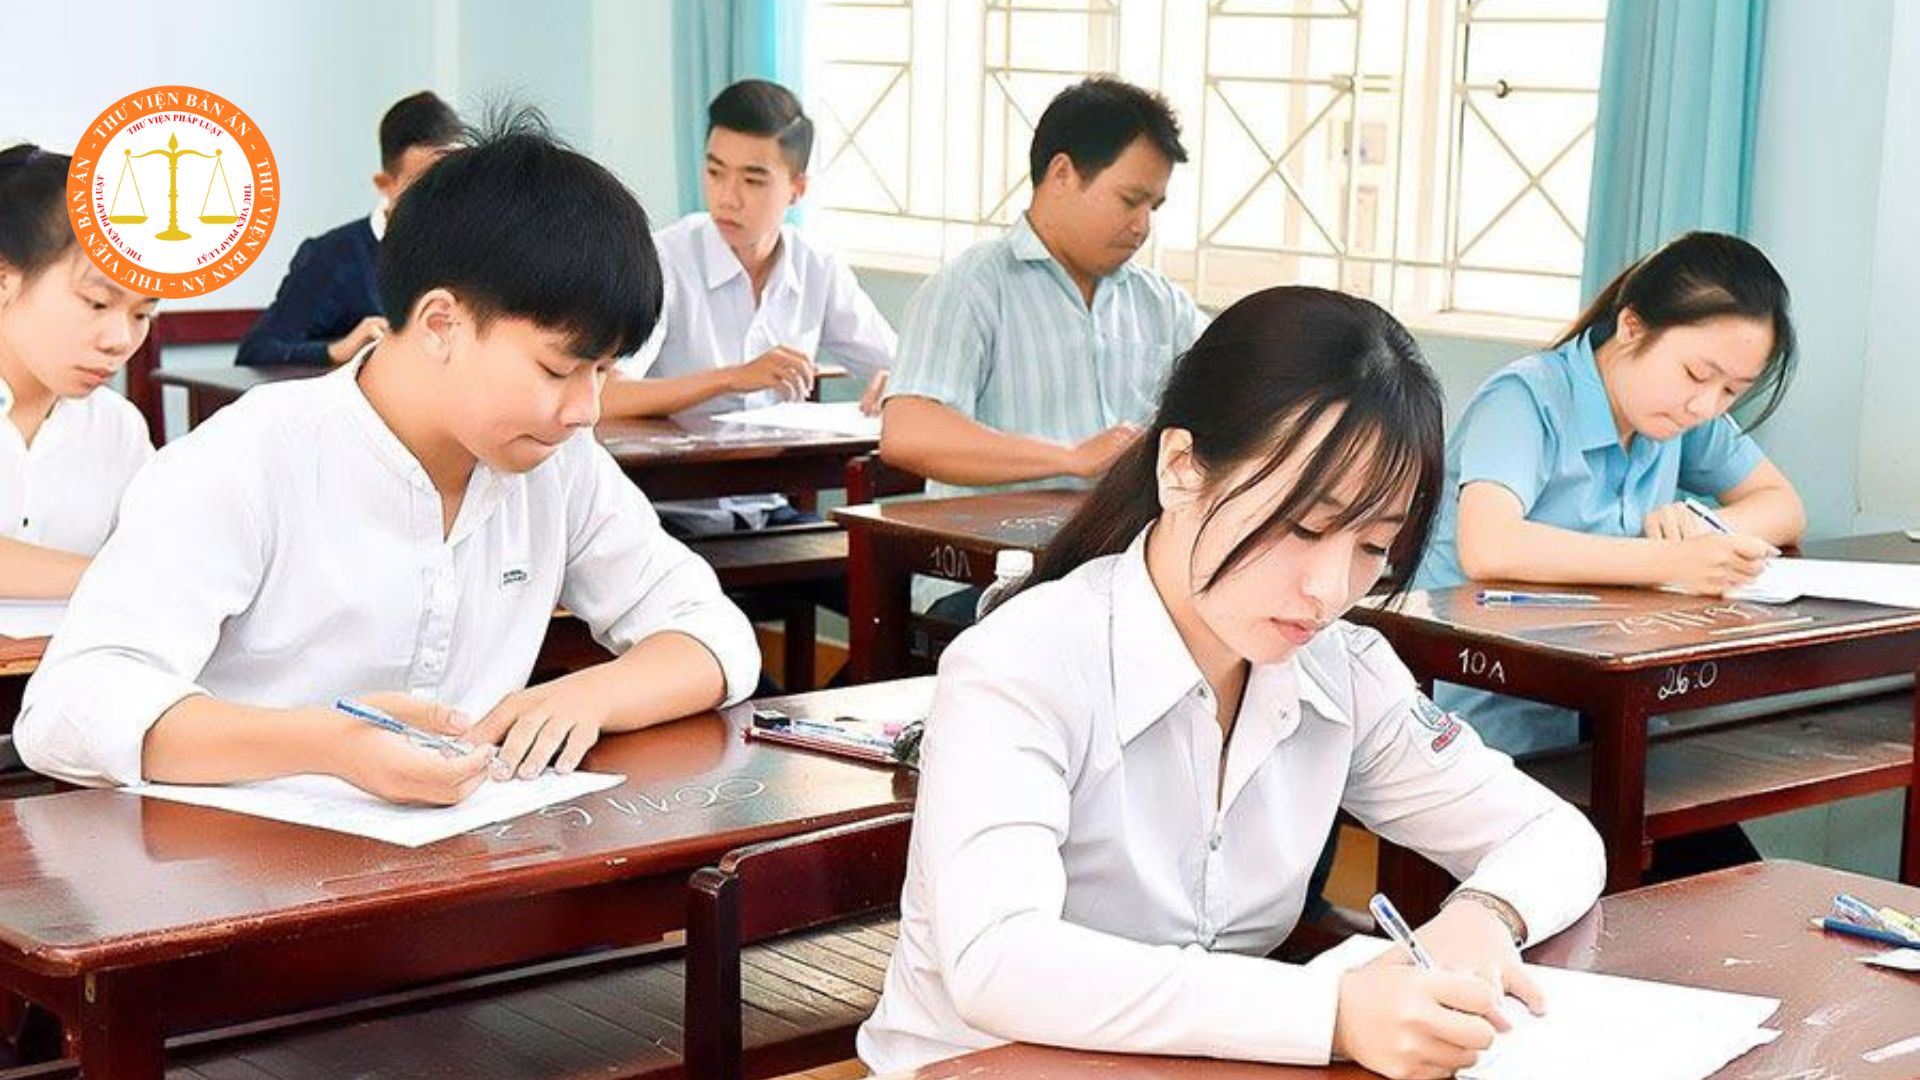 To organizing the high school exam in 2023 in Vietnam according to the motto "3 Đúng - 3 Không" (4 Yes - 3 No)